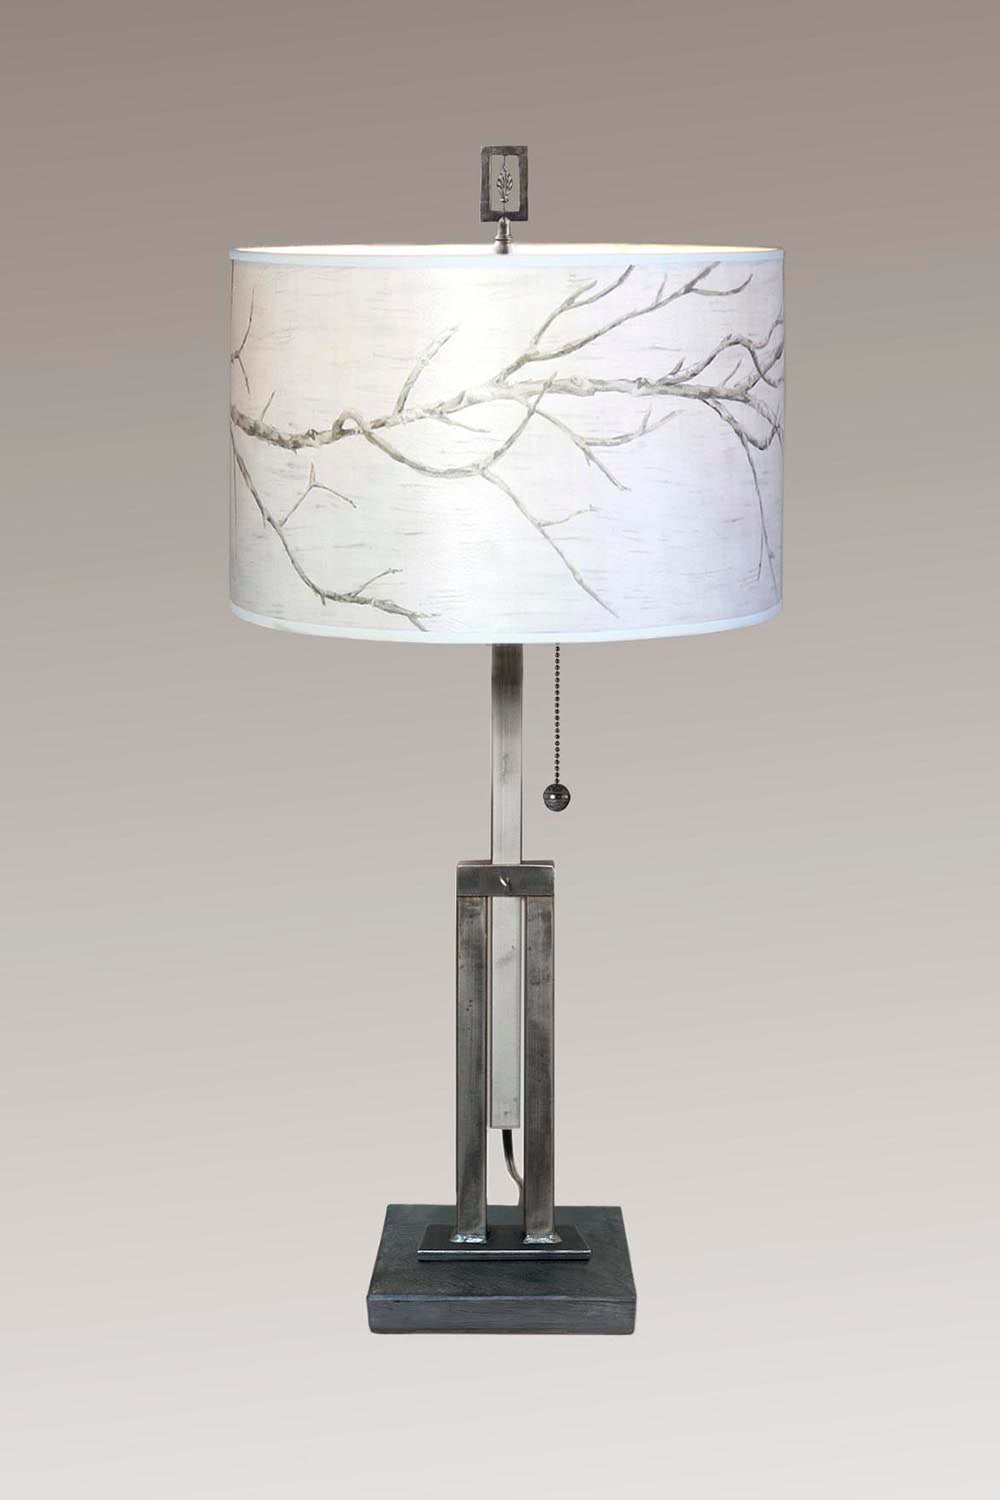 Adjustable-Height Steel Table Lamp with Large Drum Shade in Sweeping Branch